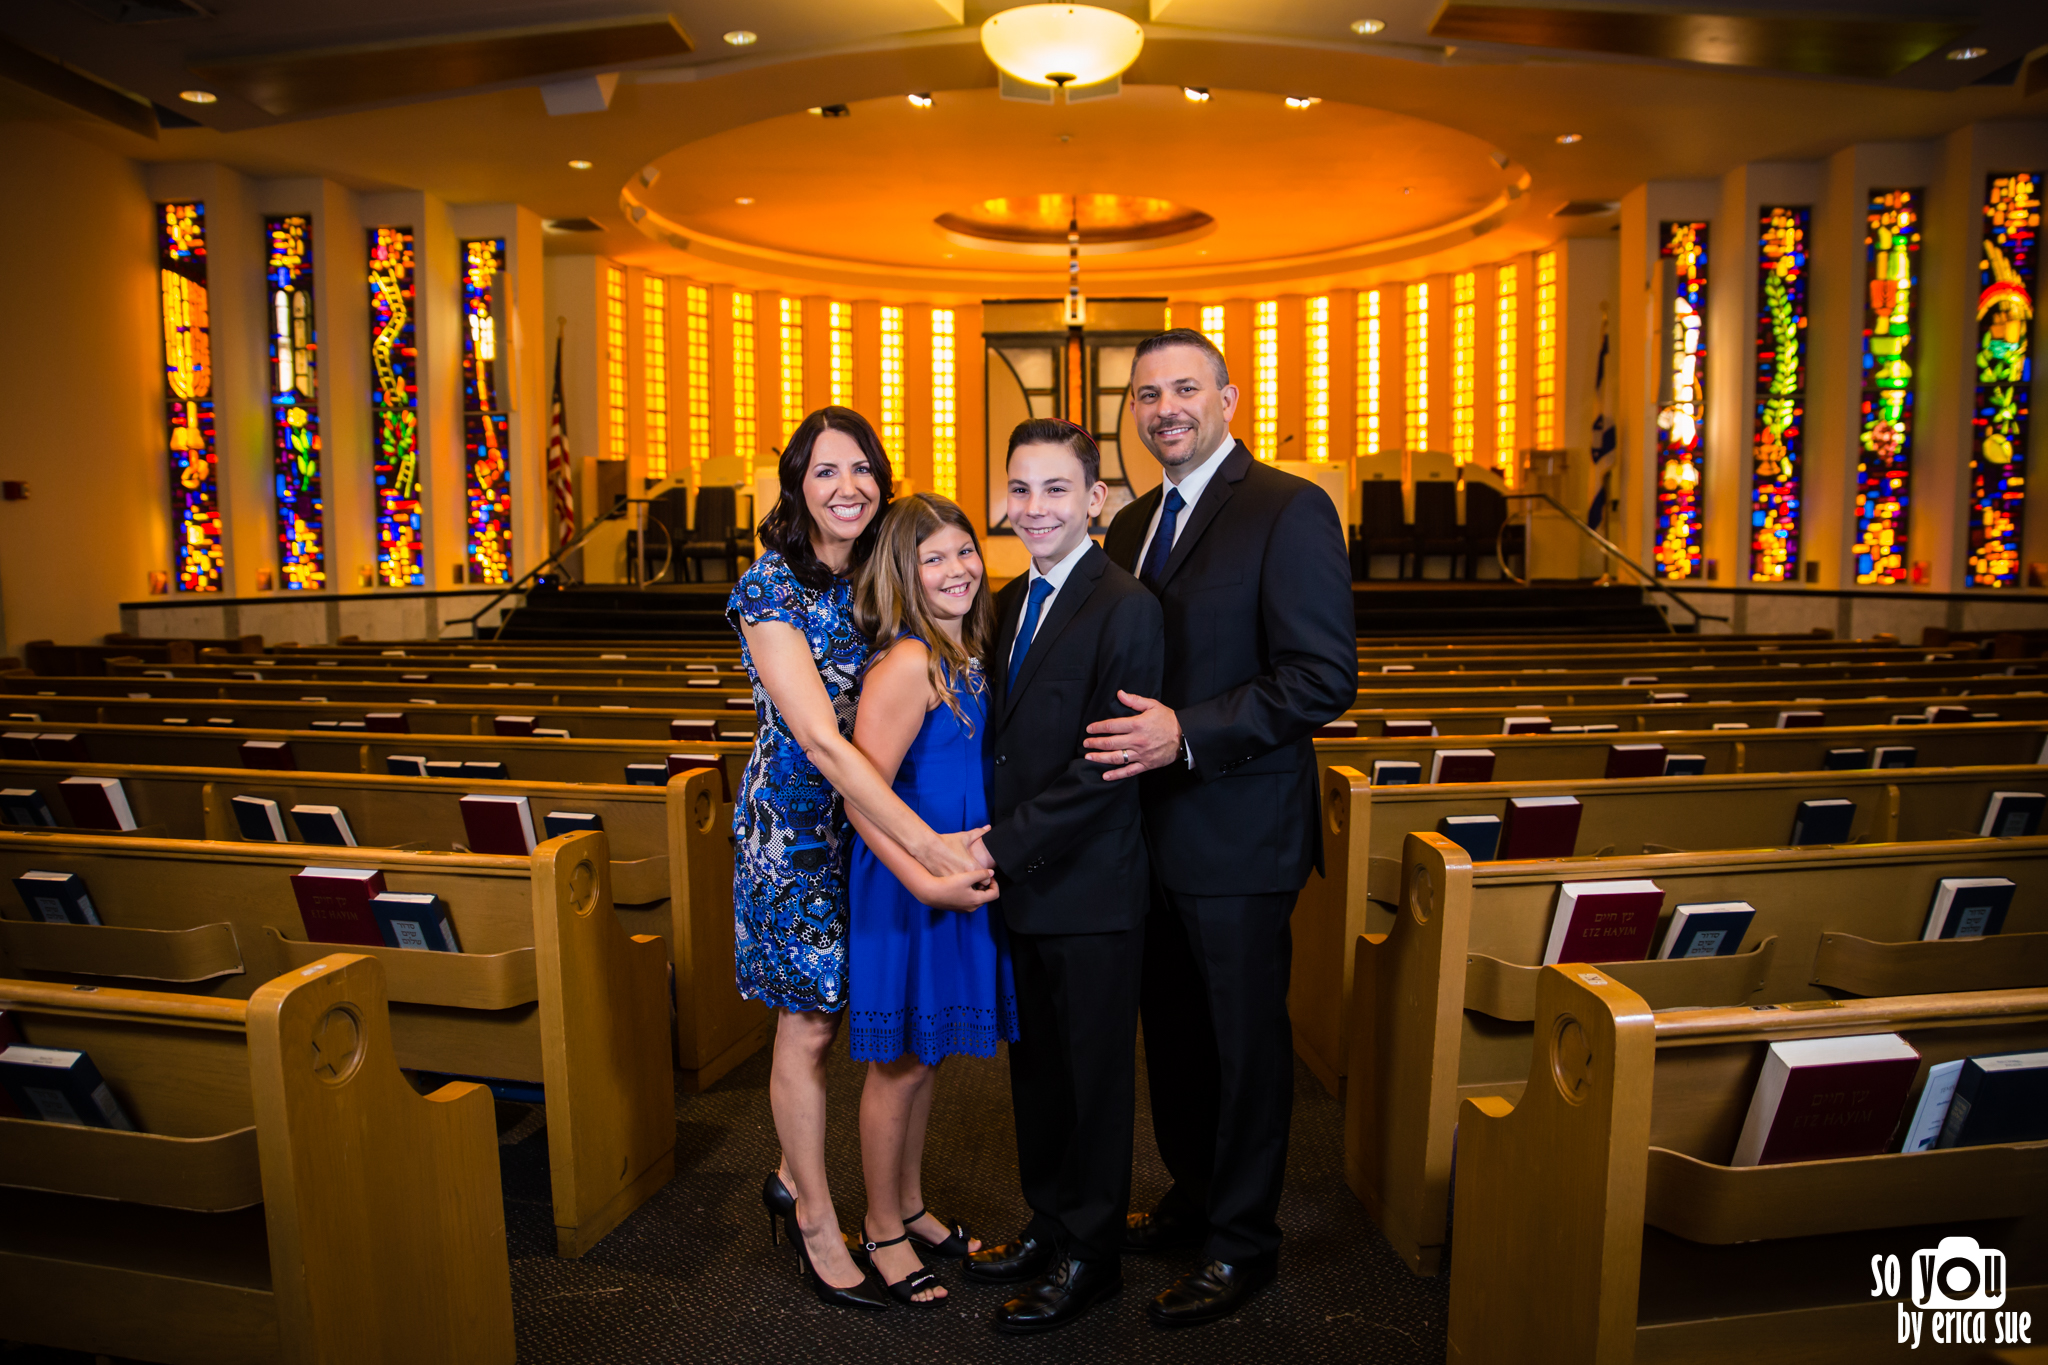 bar-mitzvah-pembroke-lakes-golf-country-club-mitzvah-photography-so-you-by-erica-sue.jpg